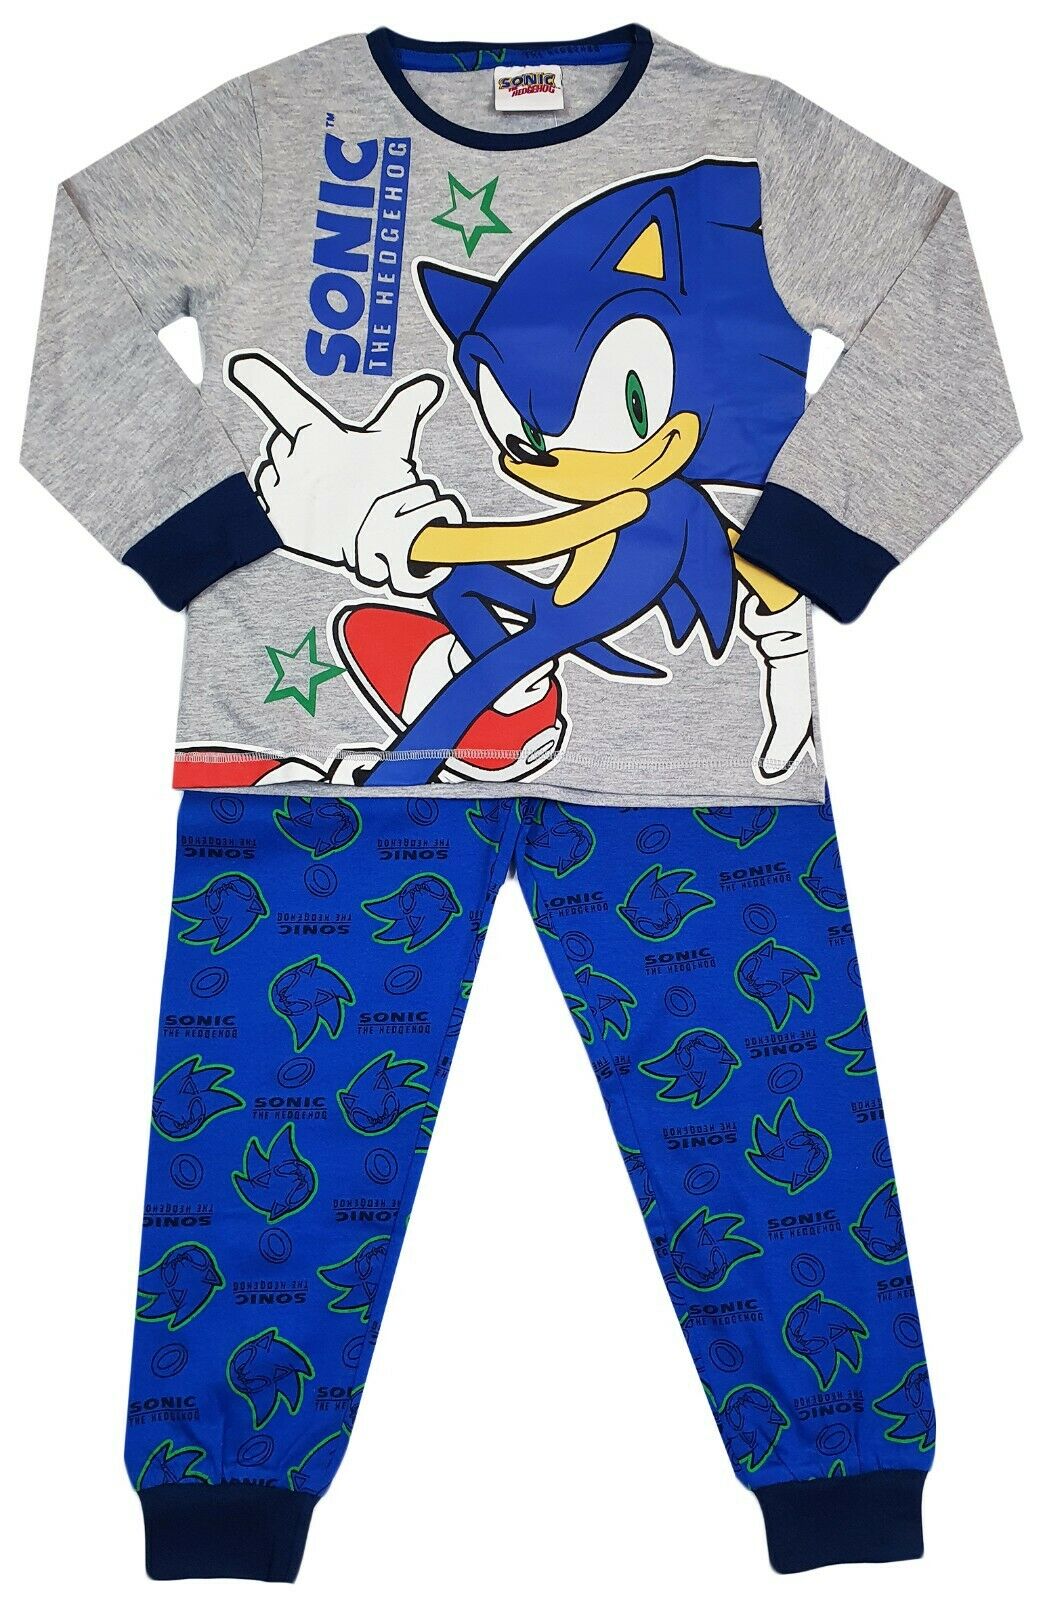 Boys sonic the hedgehog pyjamas, grey top featuring sonic and blue bottoms with a navy cuff, featuring and all over print of sonic's face